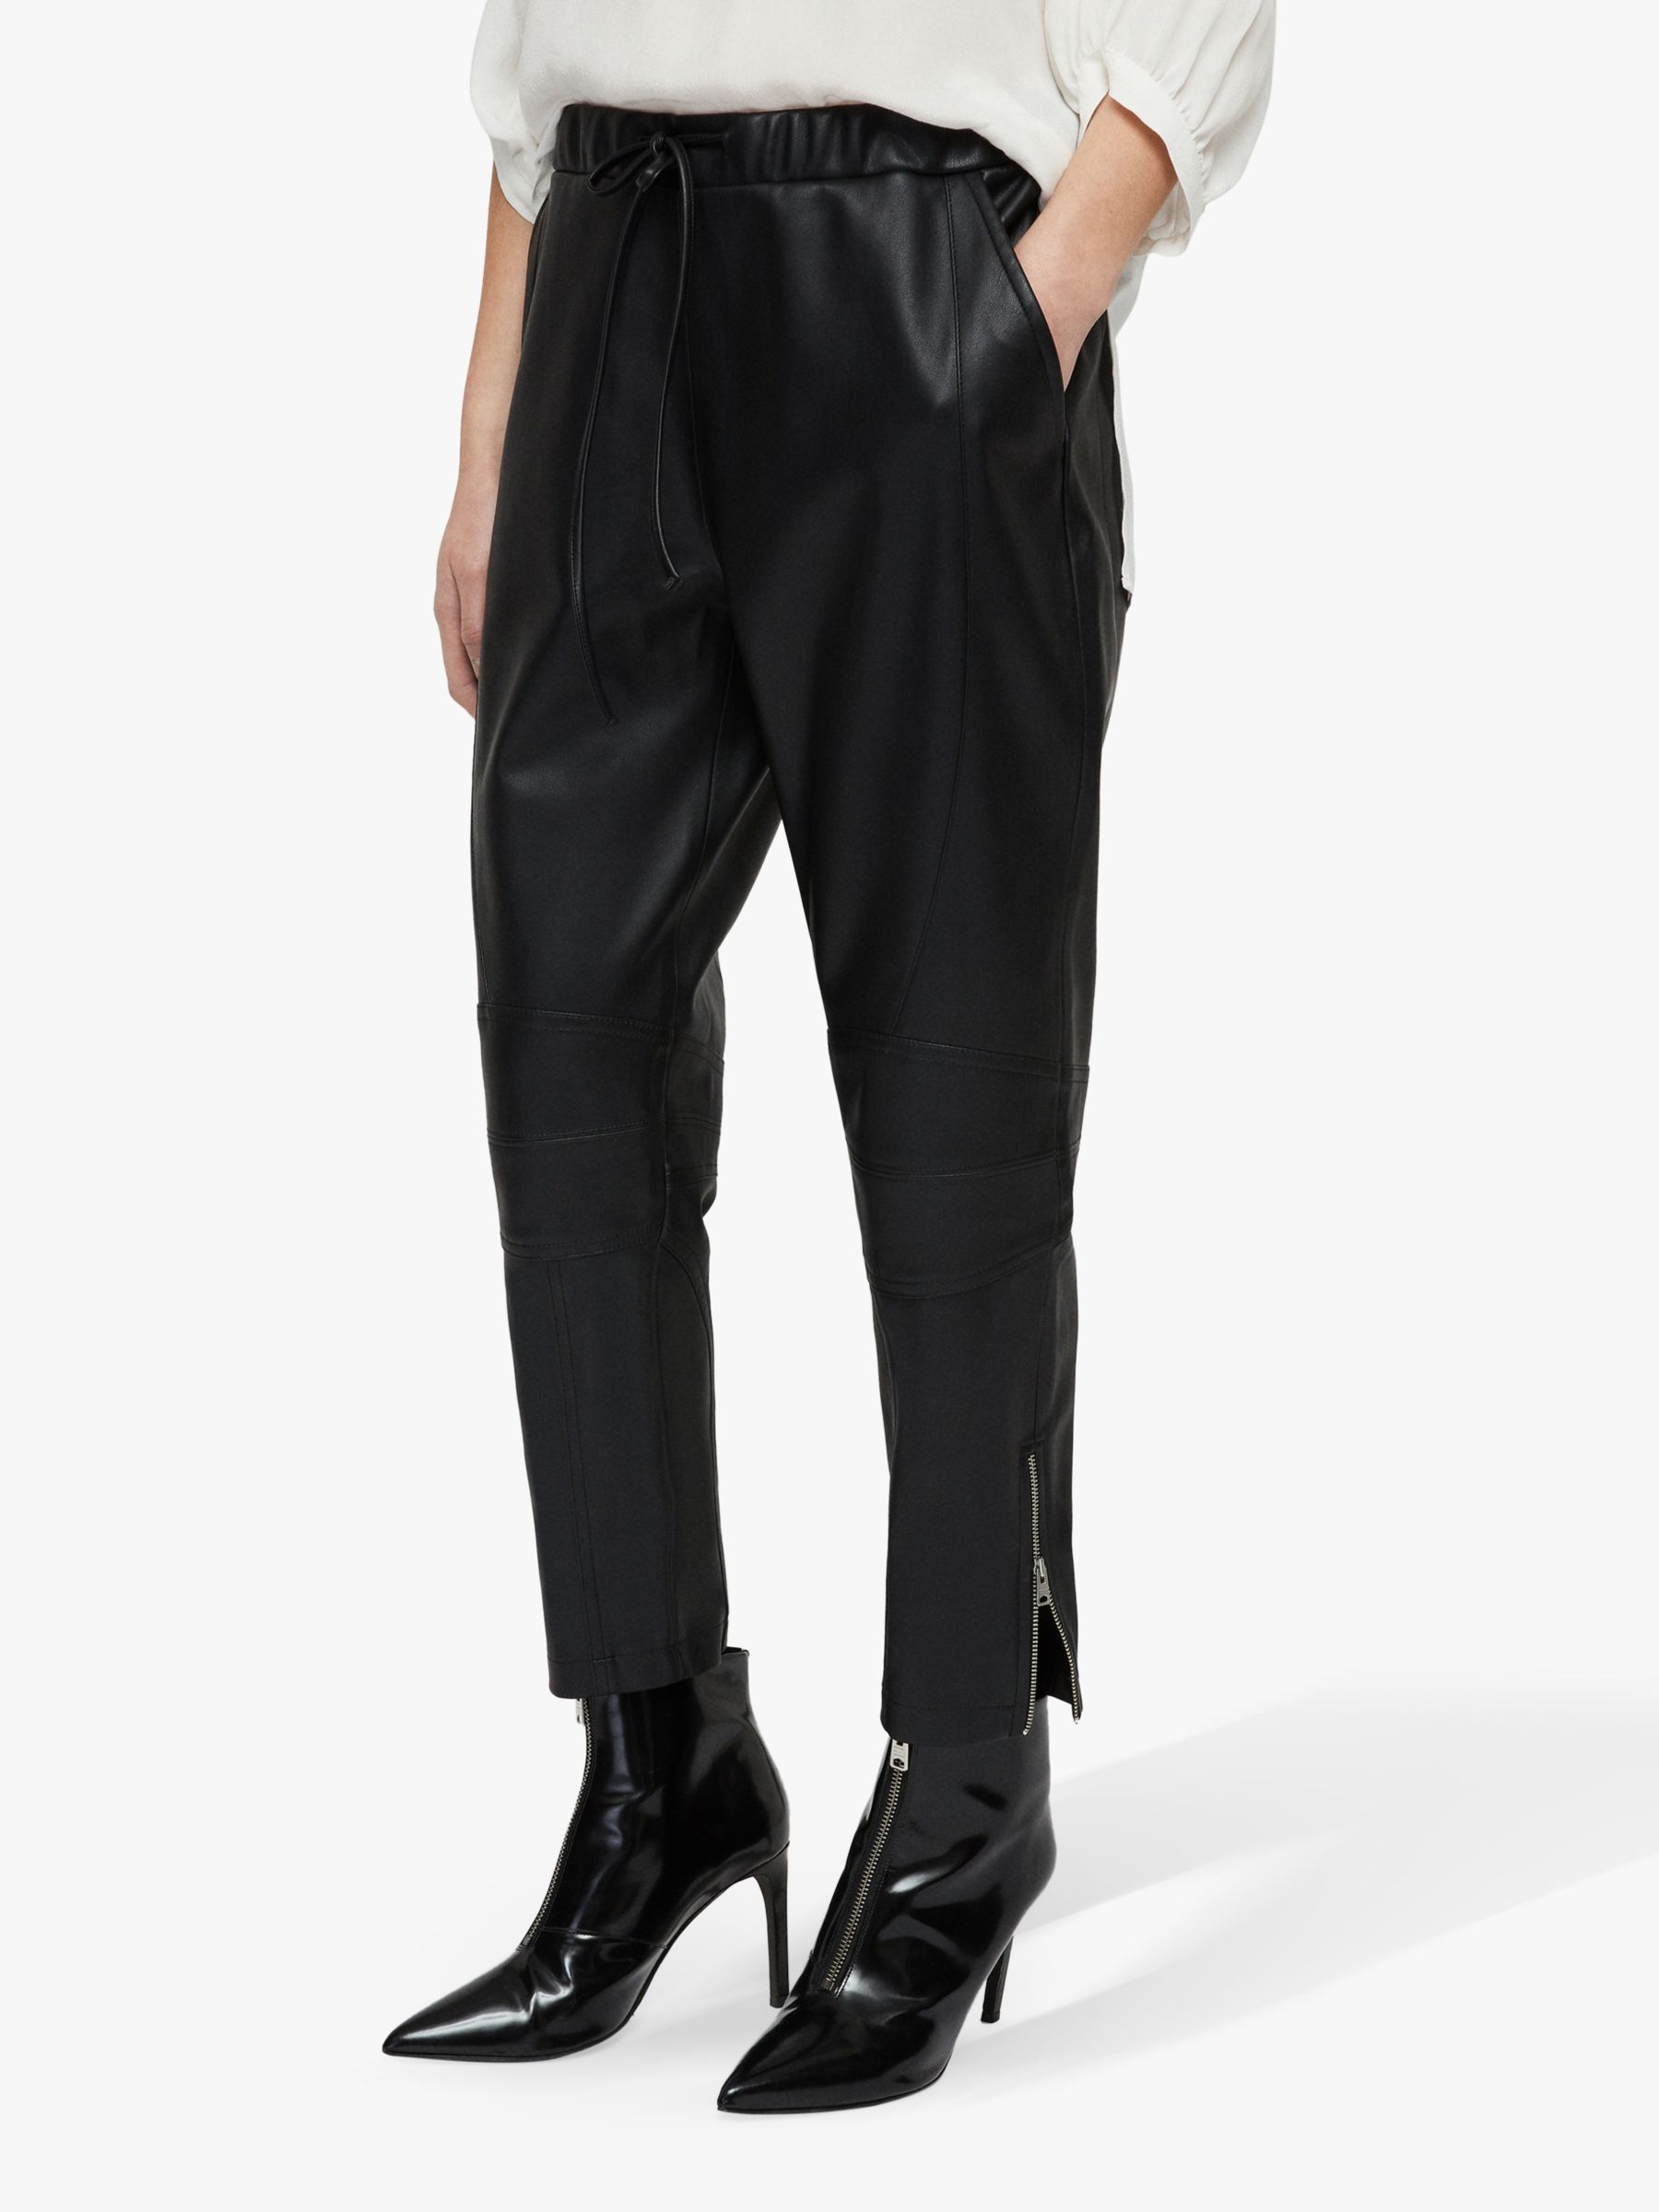 AllSaints Tinsley Trousers, Black at 